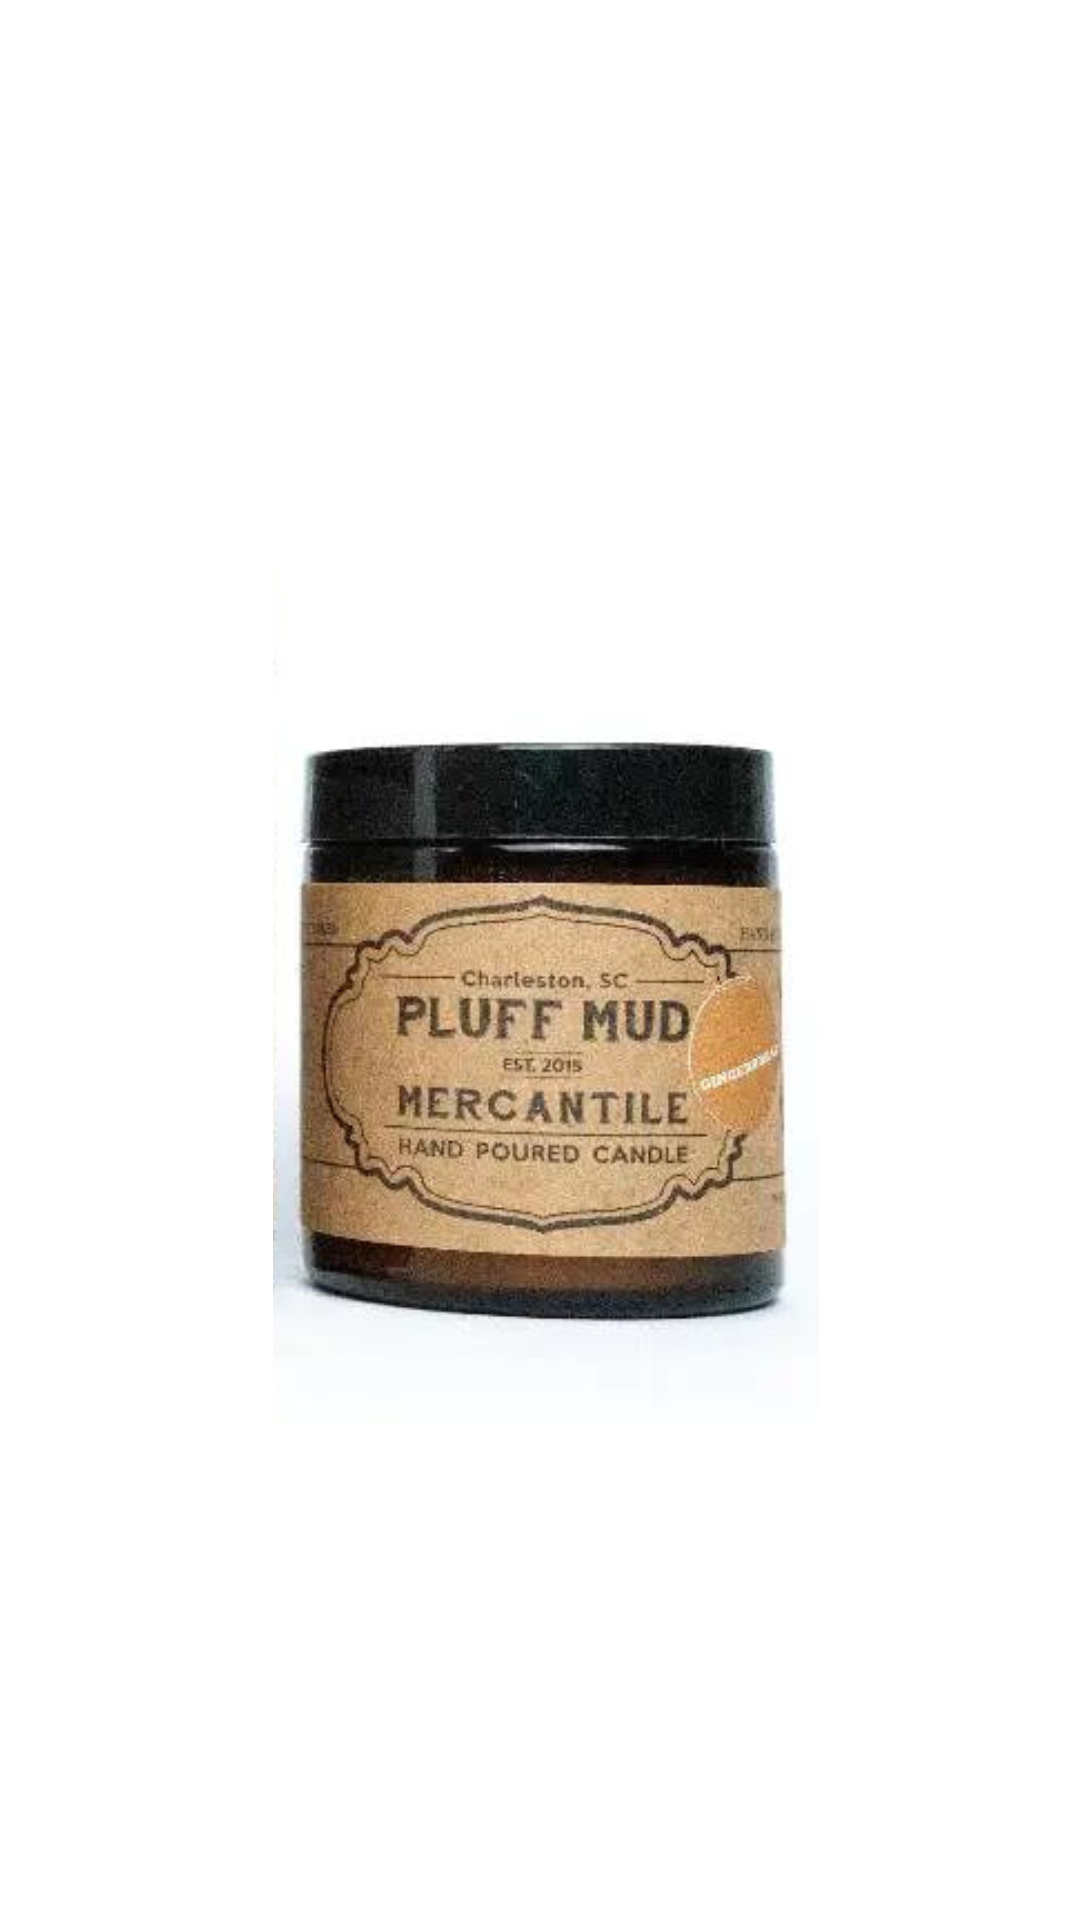 Hurricane Hand Poured Soy Candle - Pluff Mud Mercantile